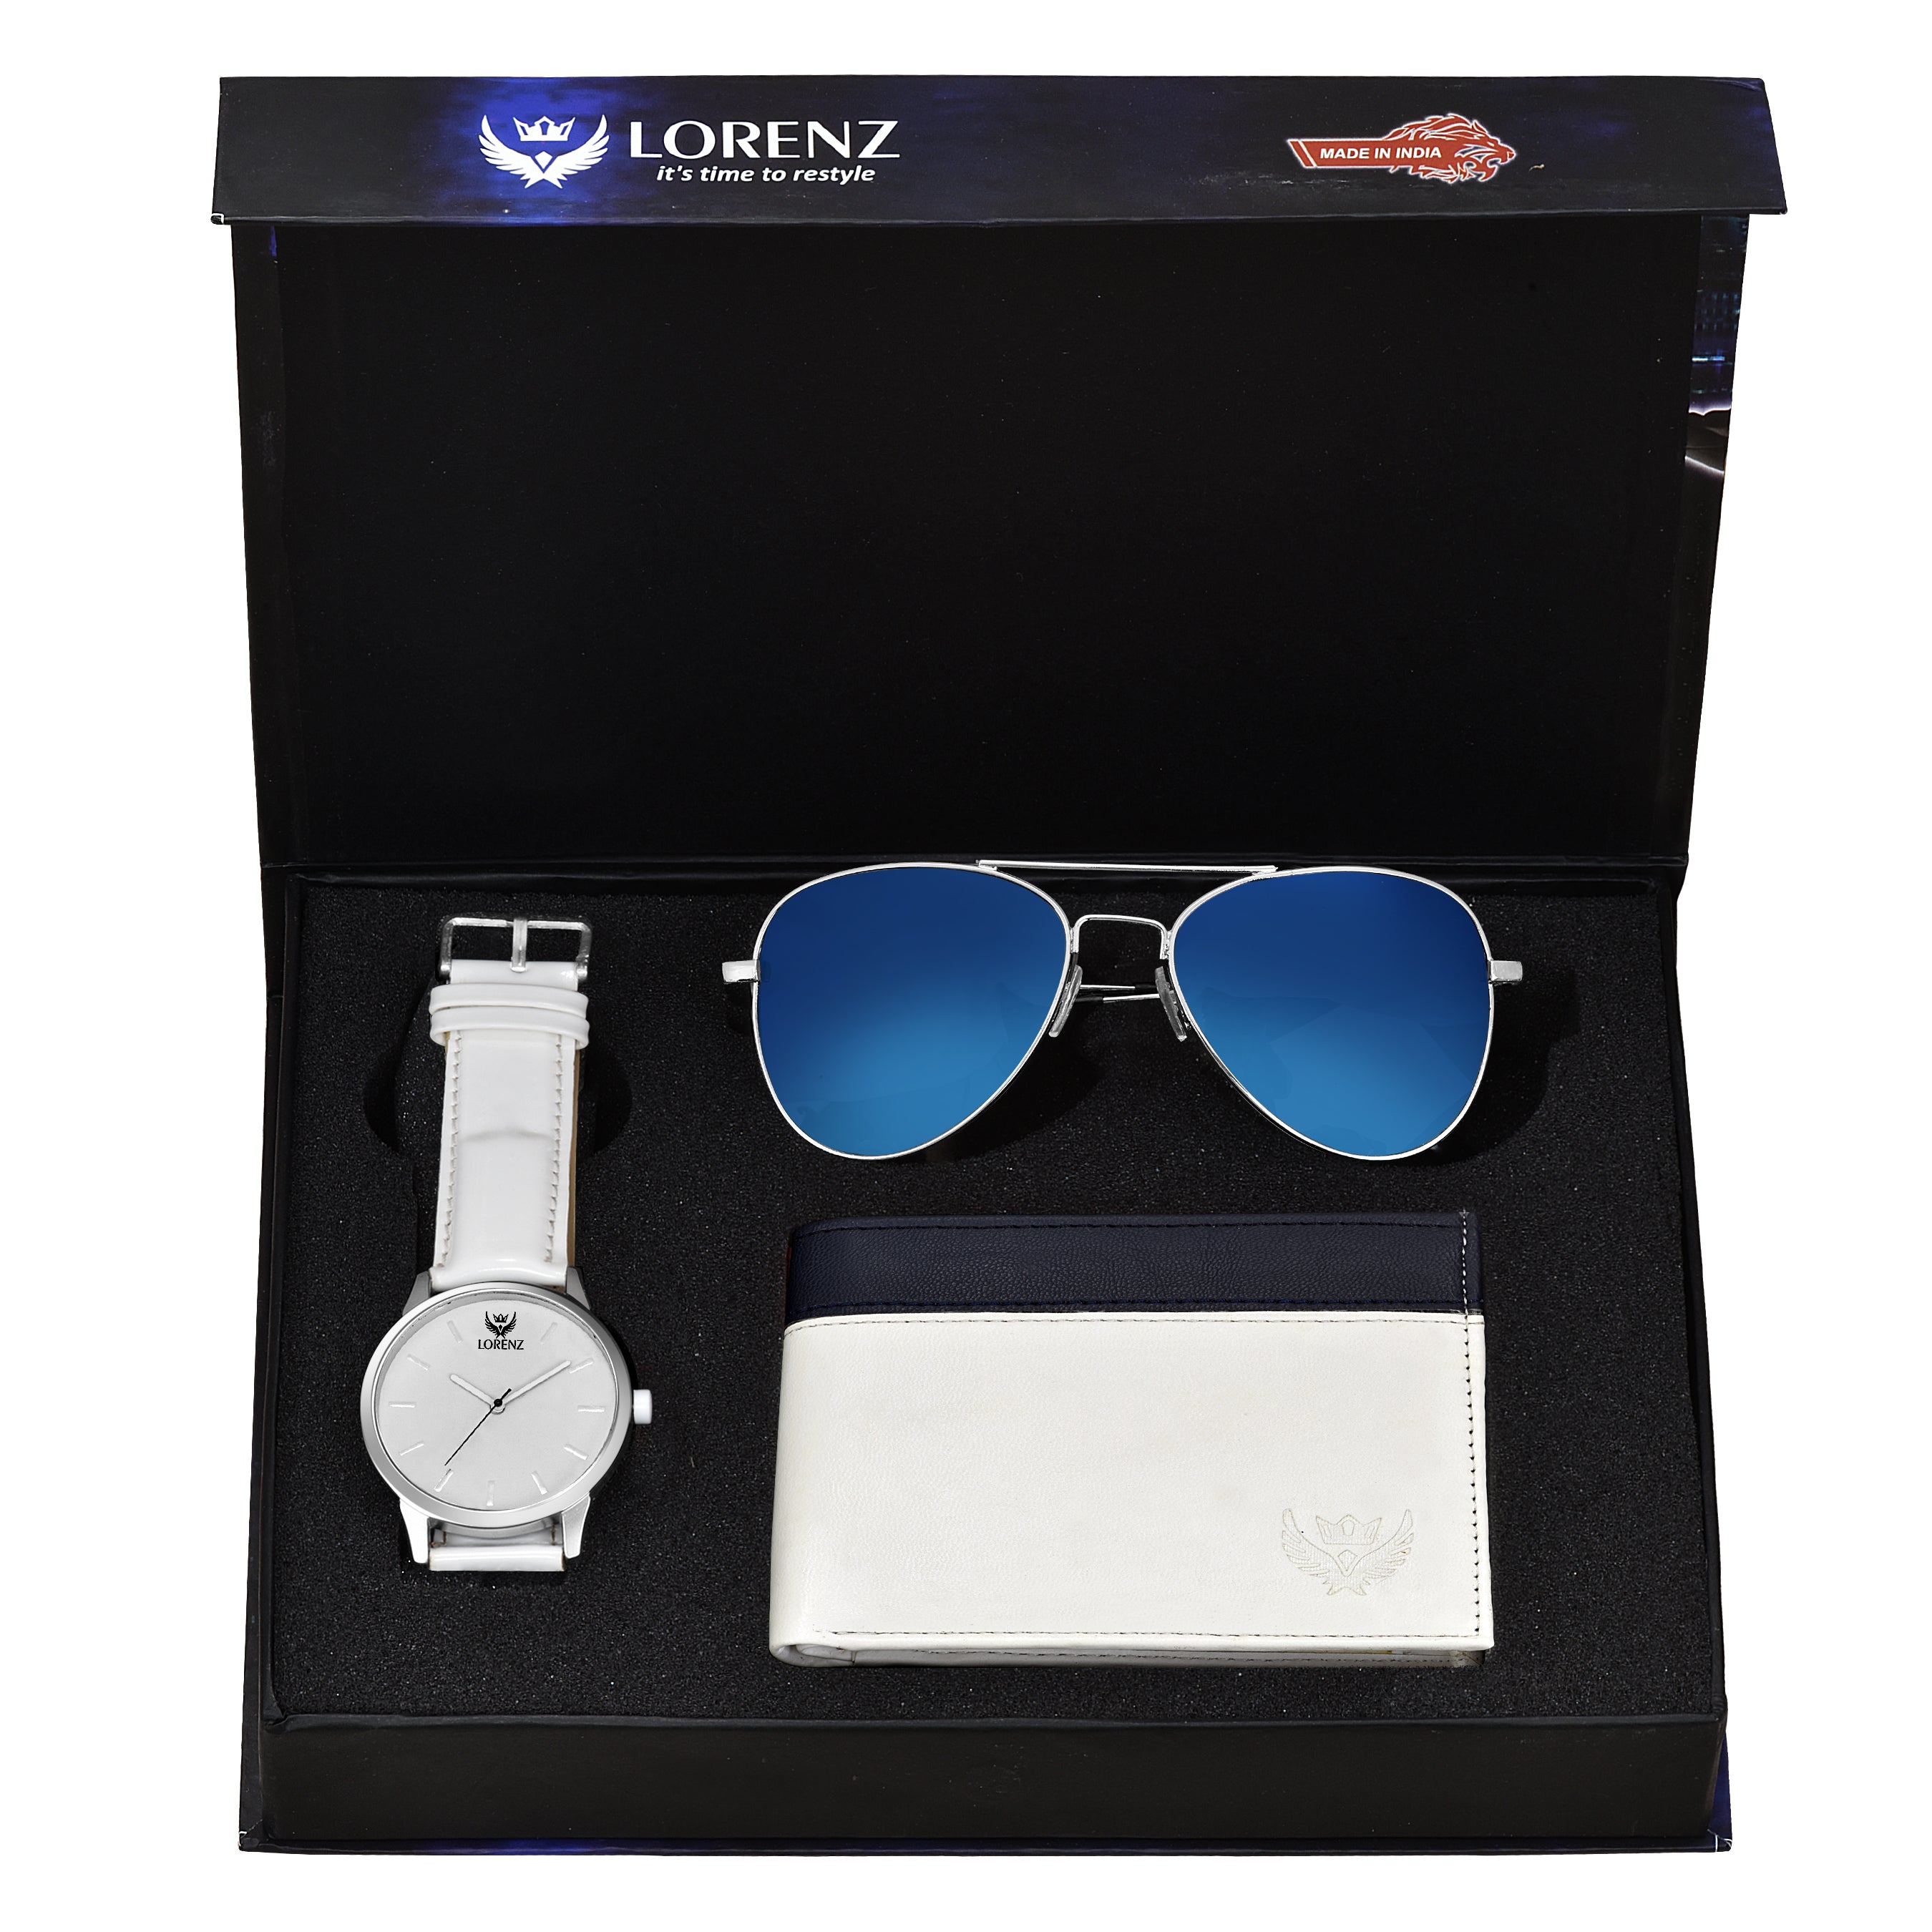  Lorenz Men's Gift Set featuring a white dial watch, white wallet, and blue reflector sunglasses.